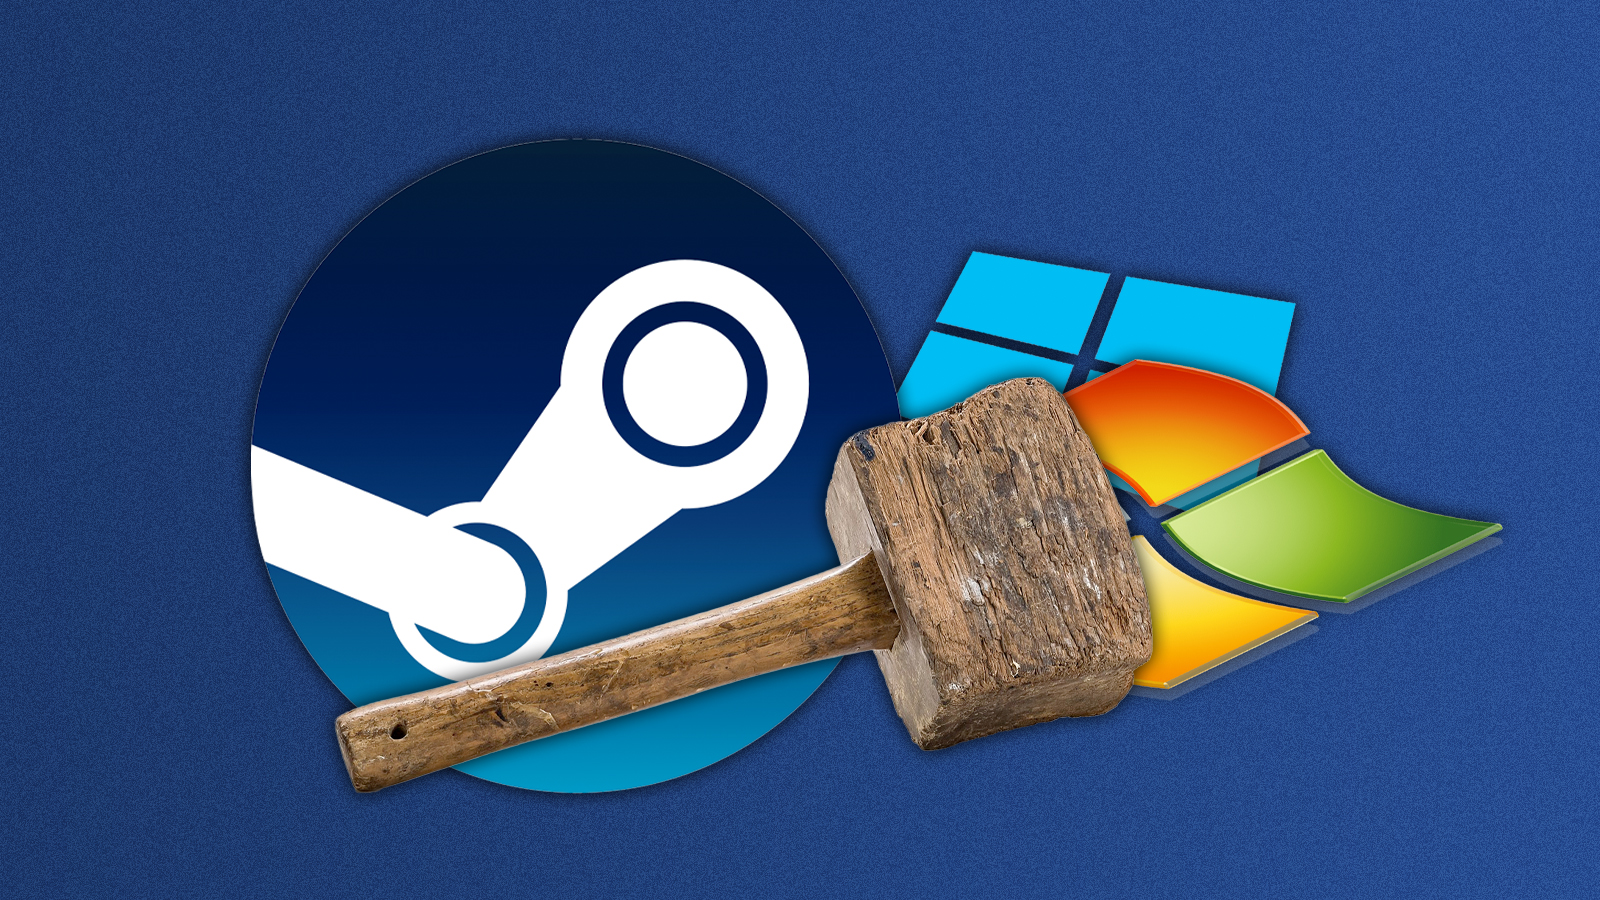 Valve is ending support for Steam on Windows 7 and 8.1 PCs – Egaxo